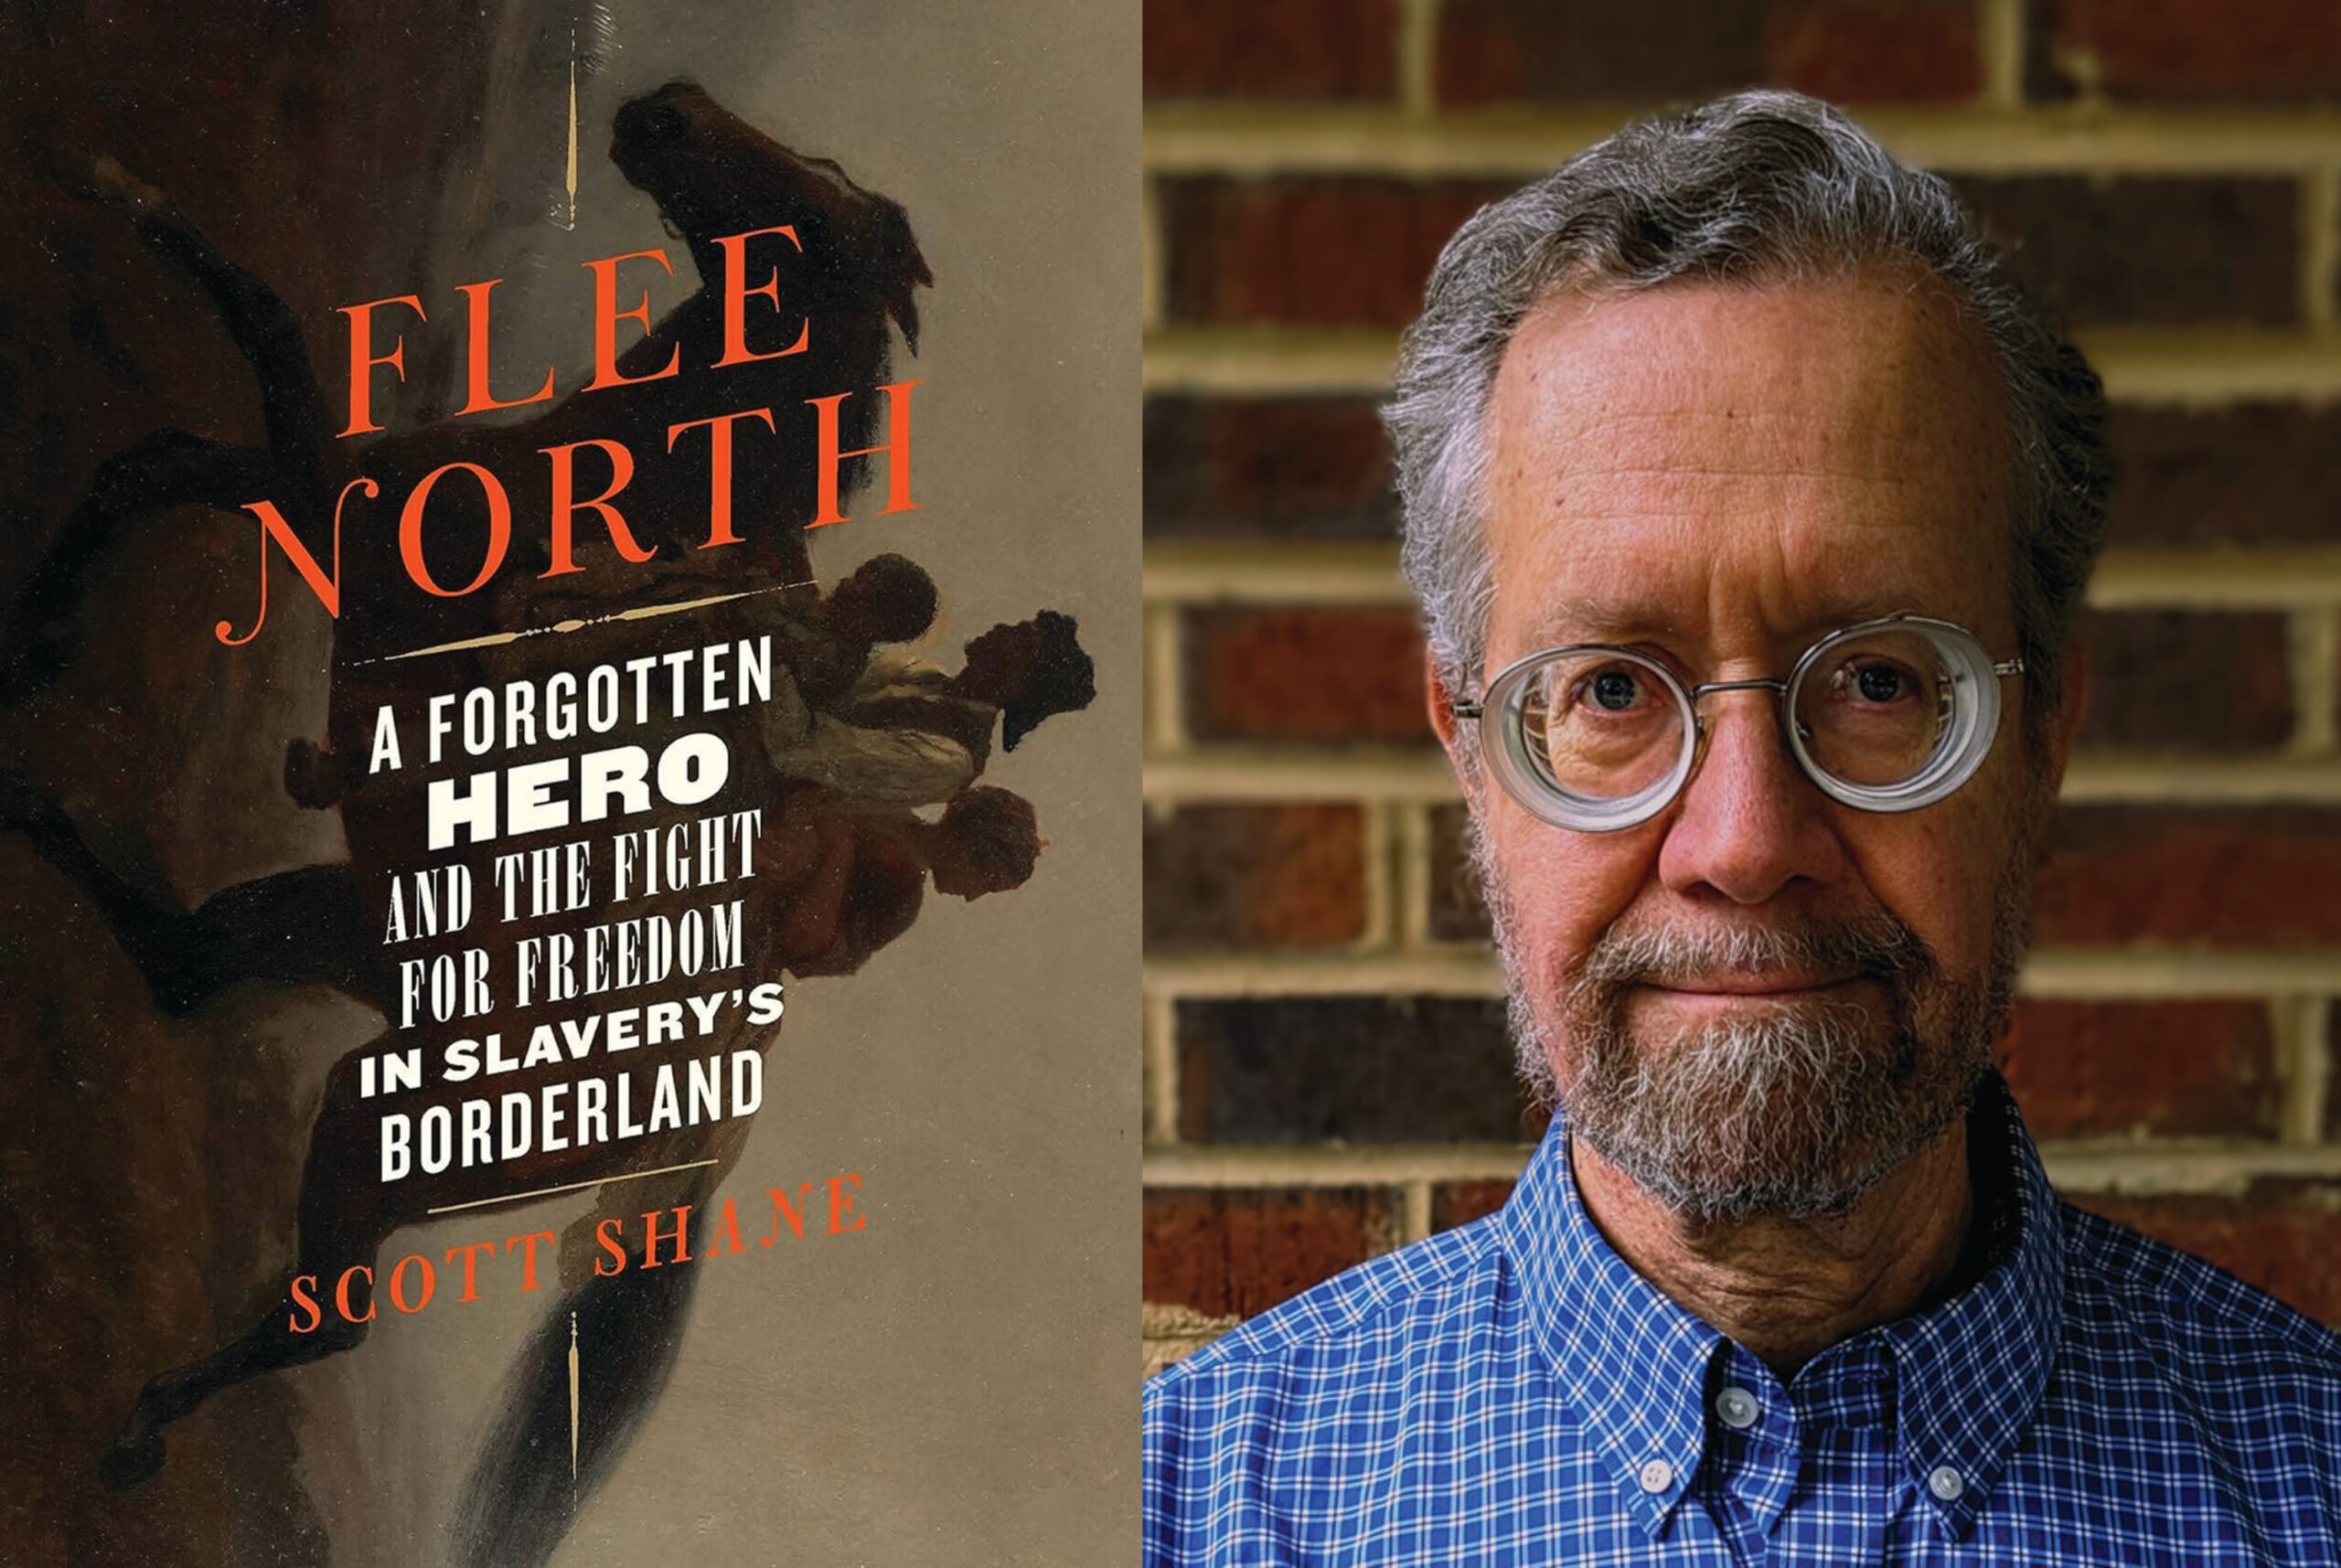 Flee North: A Forgotten Hero and the Fight for Freedom in Slavery’s Borderland by Scott Shane